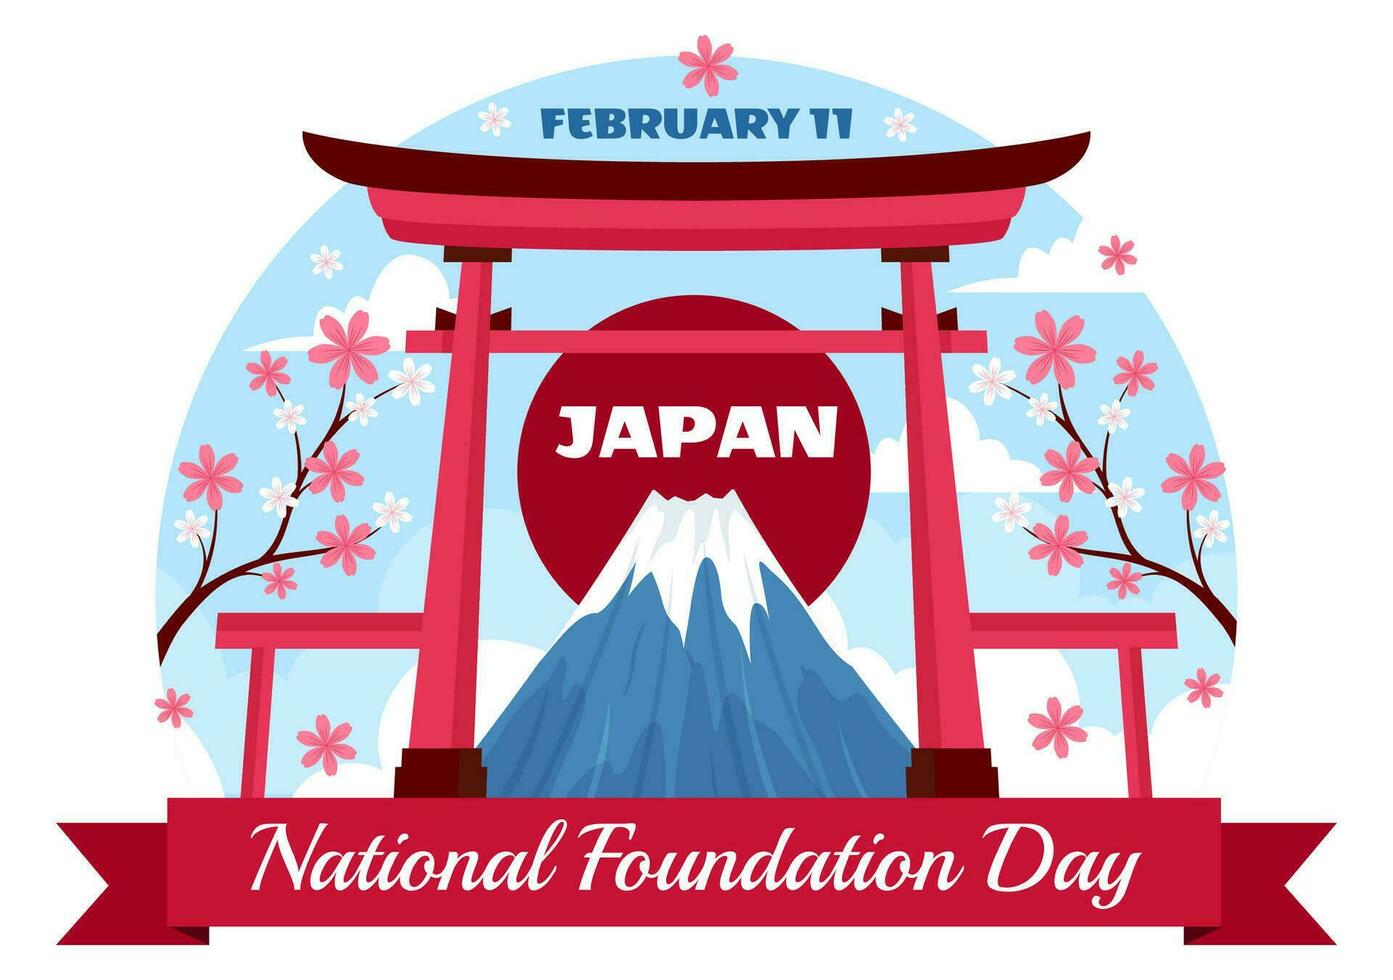 Happy Japan National Foundation Day Vector Illustration on February 11 with Famous Japanese Landmarks and Flag in Flat Kids Cartoon Background